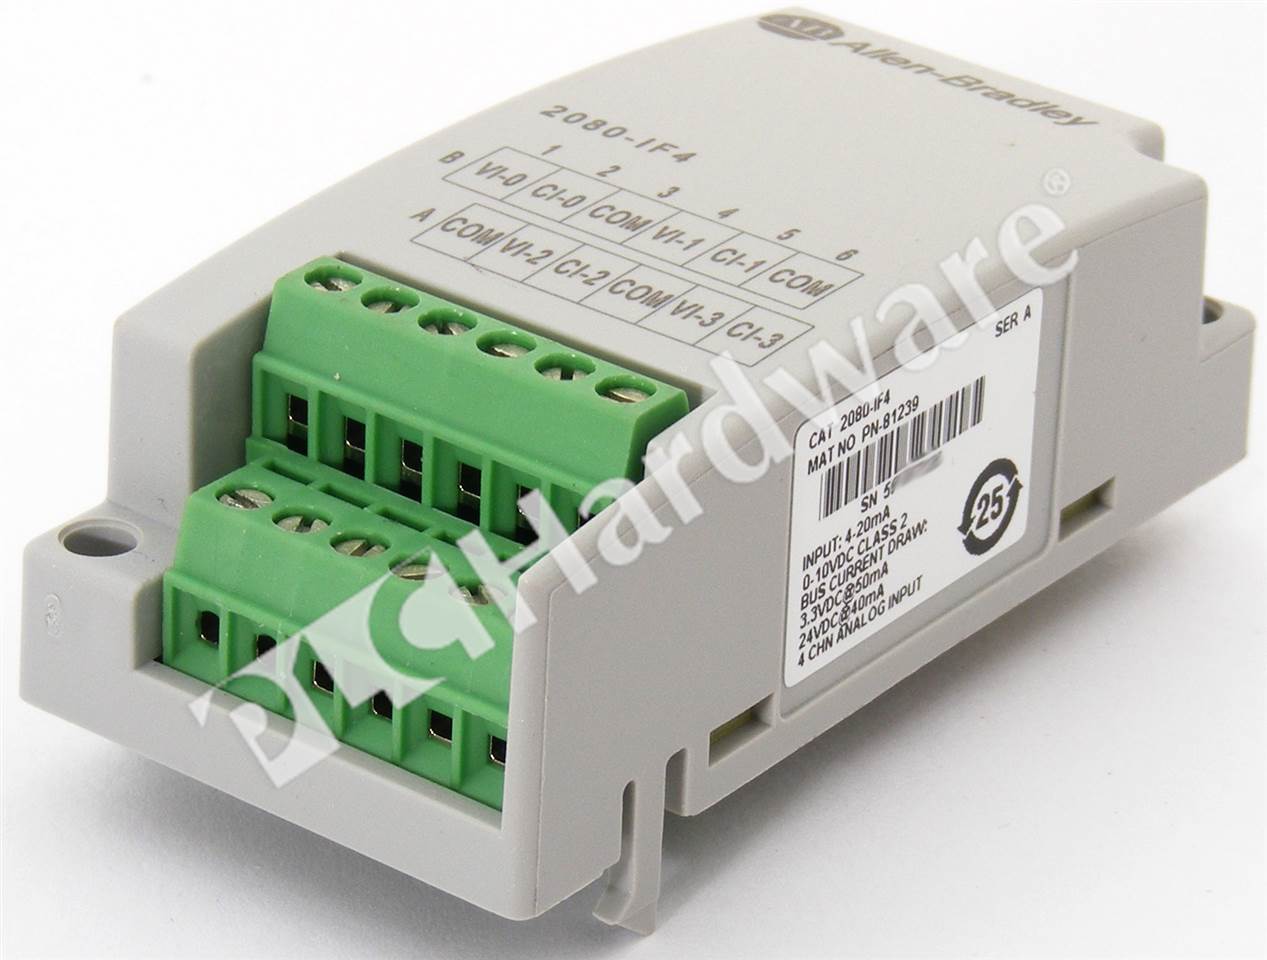 1PC Sealed New 2080-IF4 SER A Micro800 4-Channel Voltage//Current Input Module.